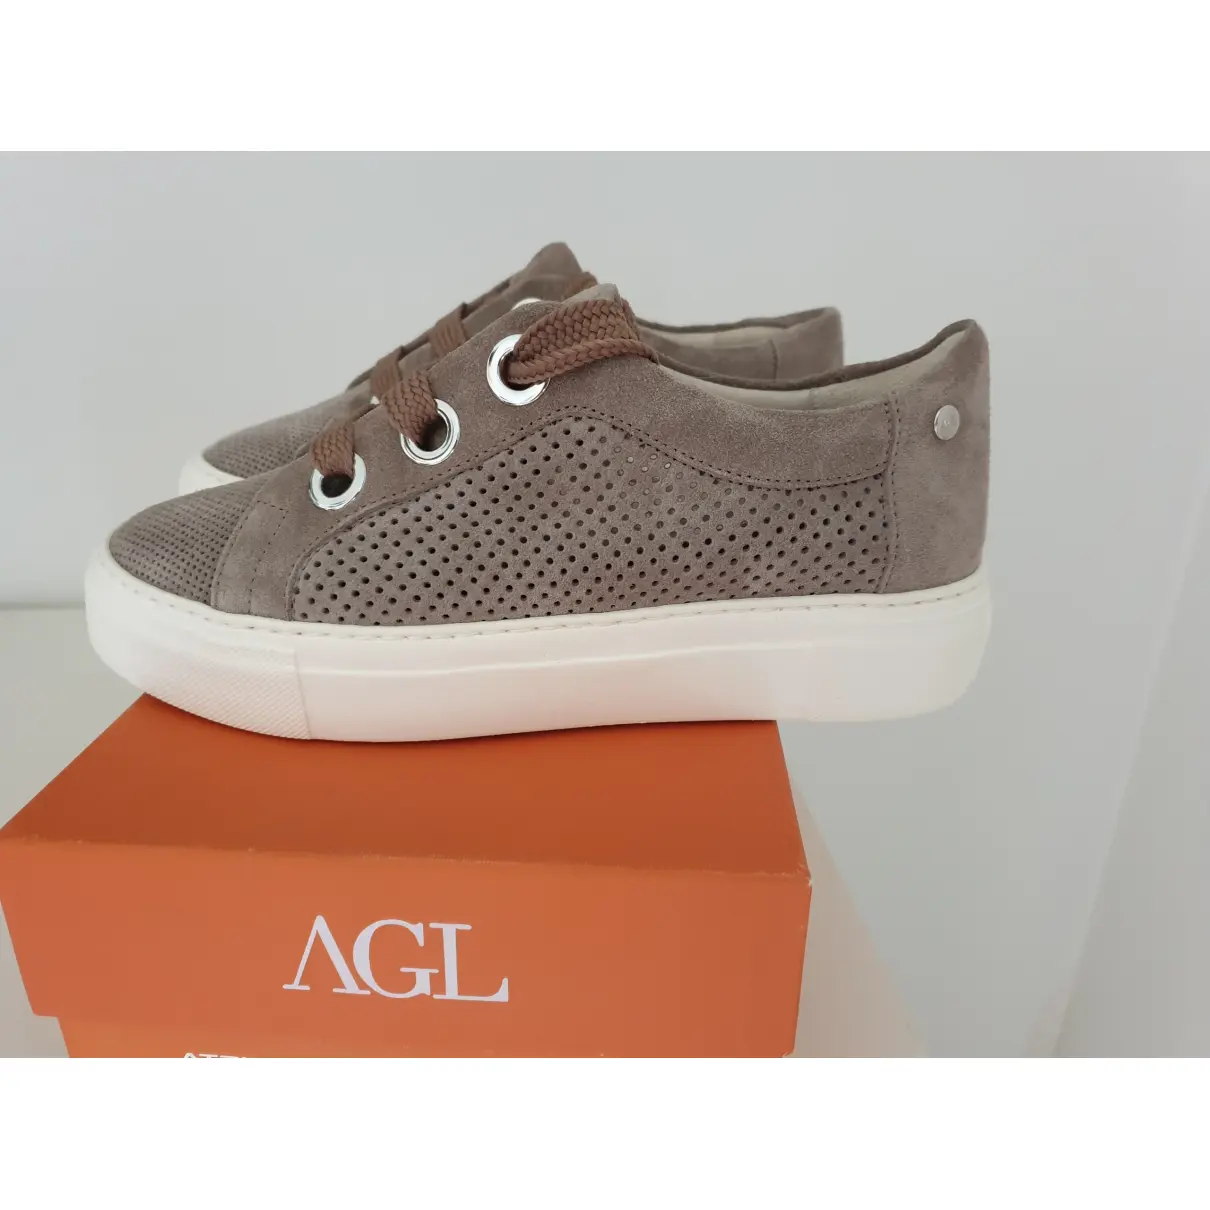 Buy Agl Leather trainers online